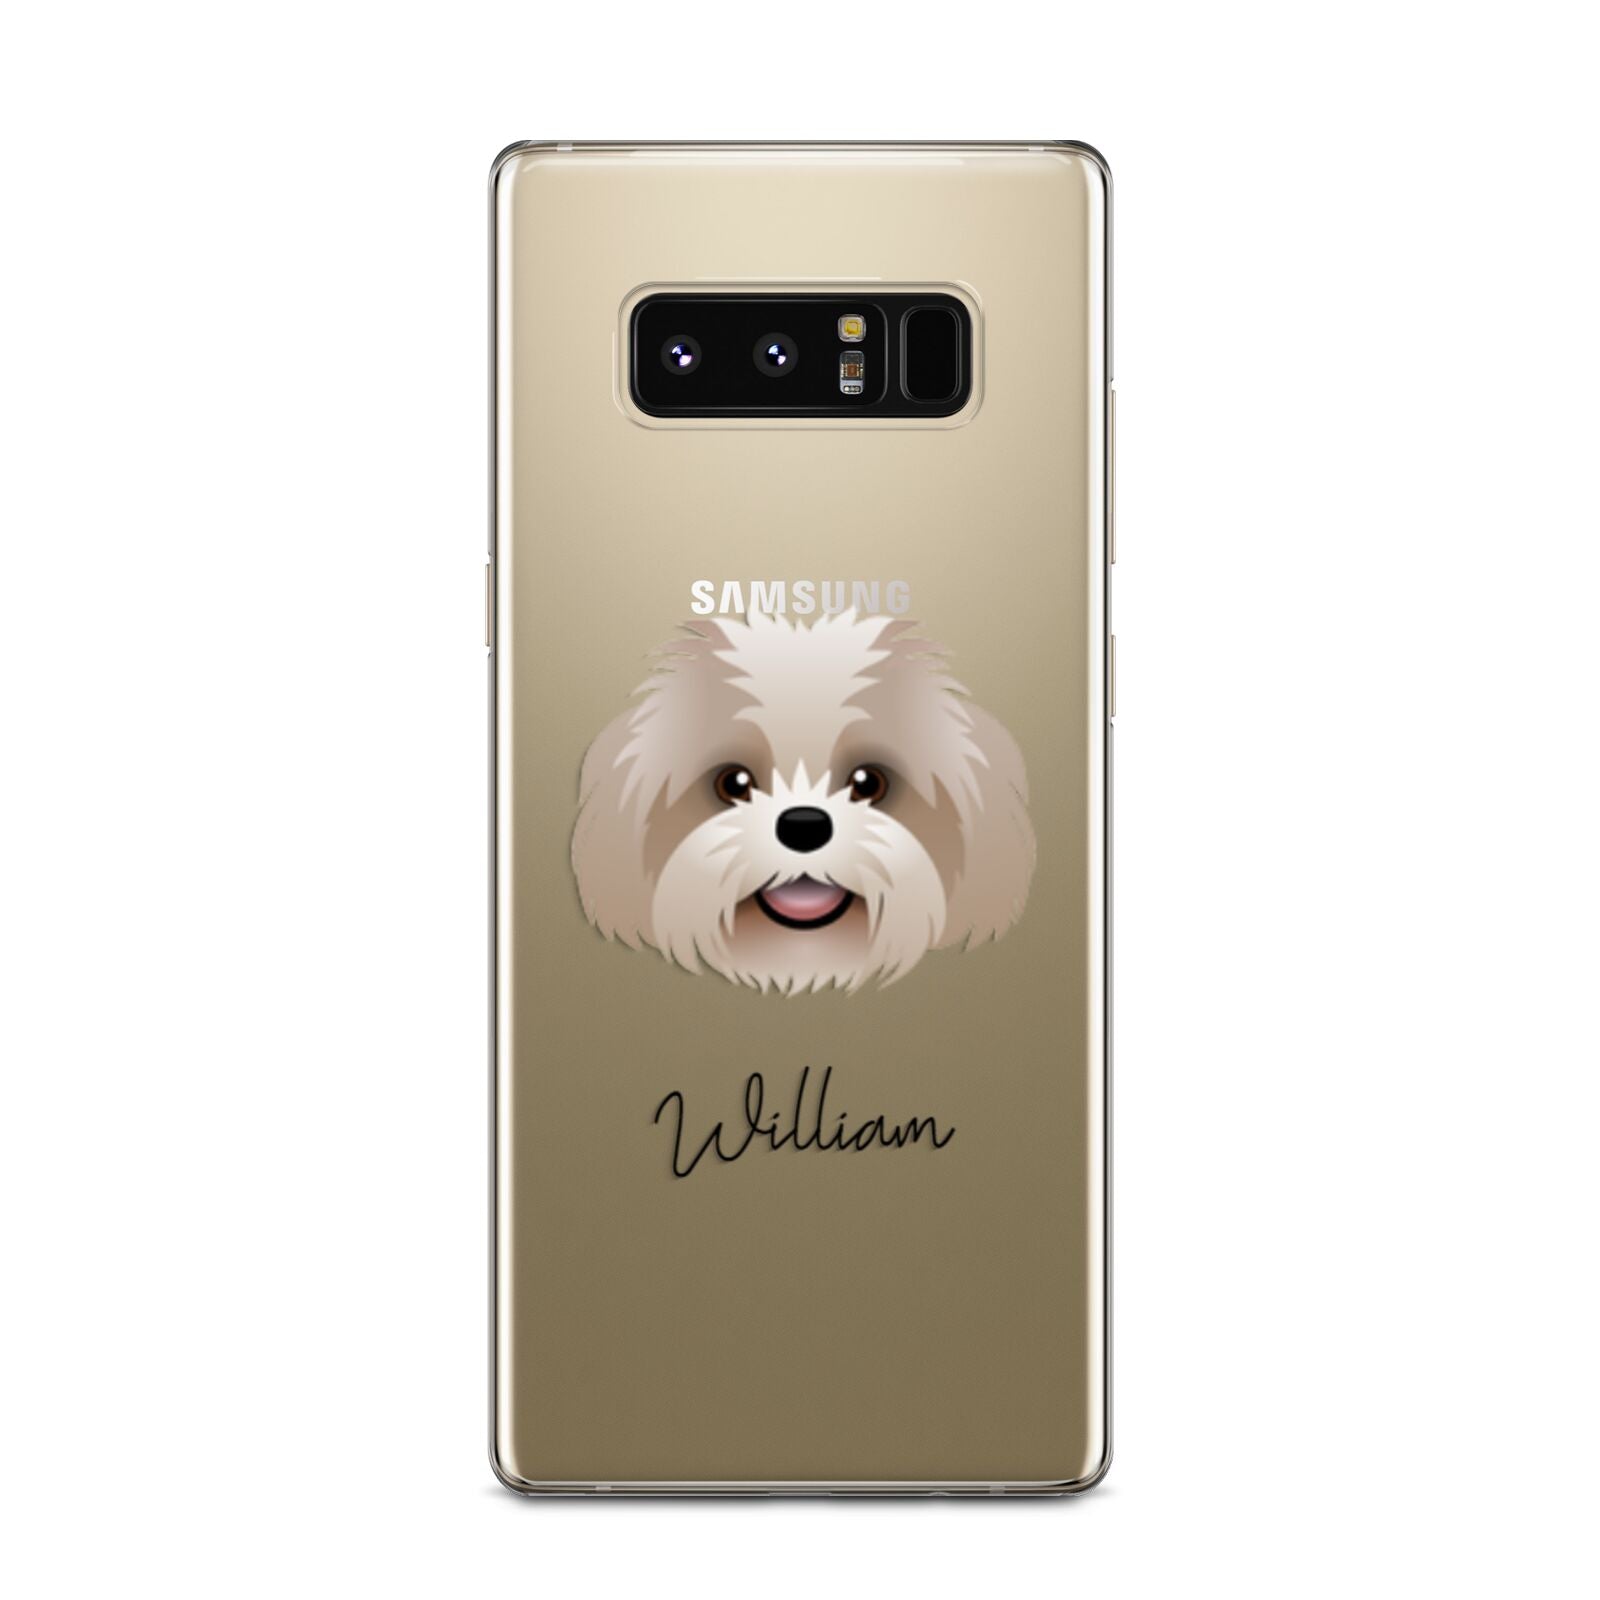 Shih Poo Personalised Samsung Galaxy Note 8 Case